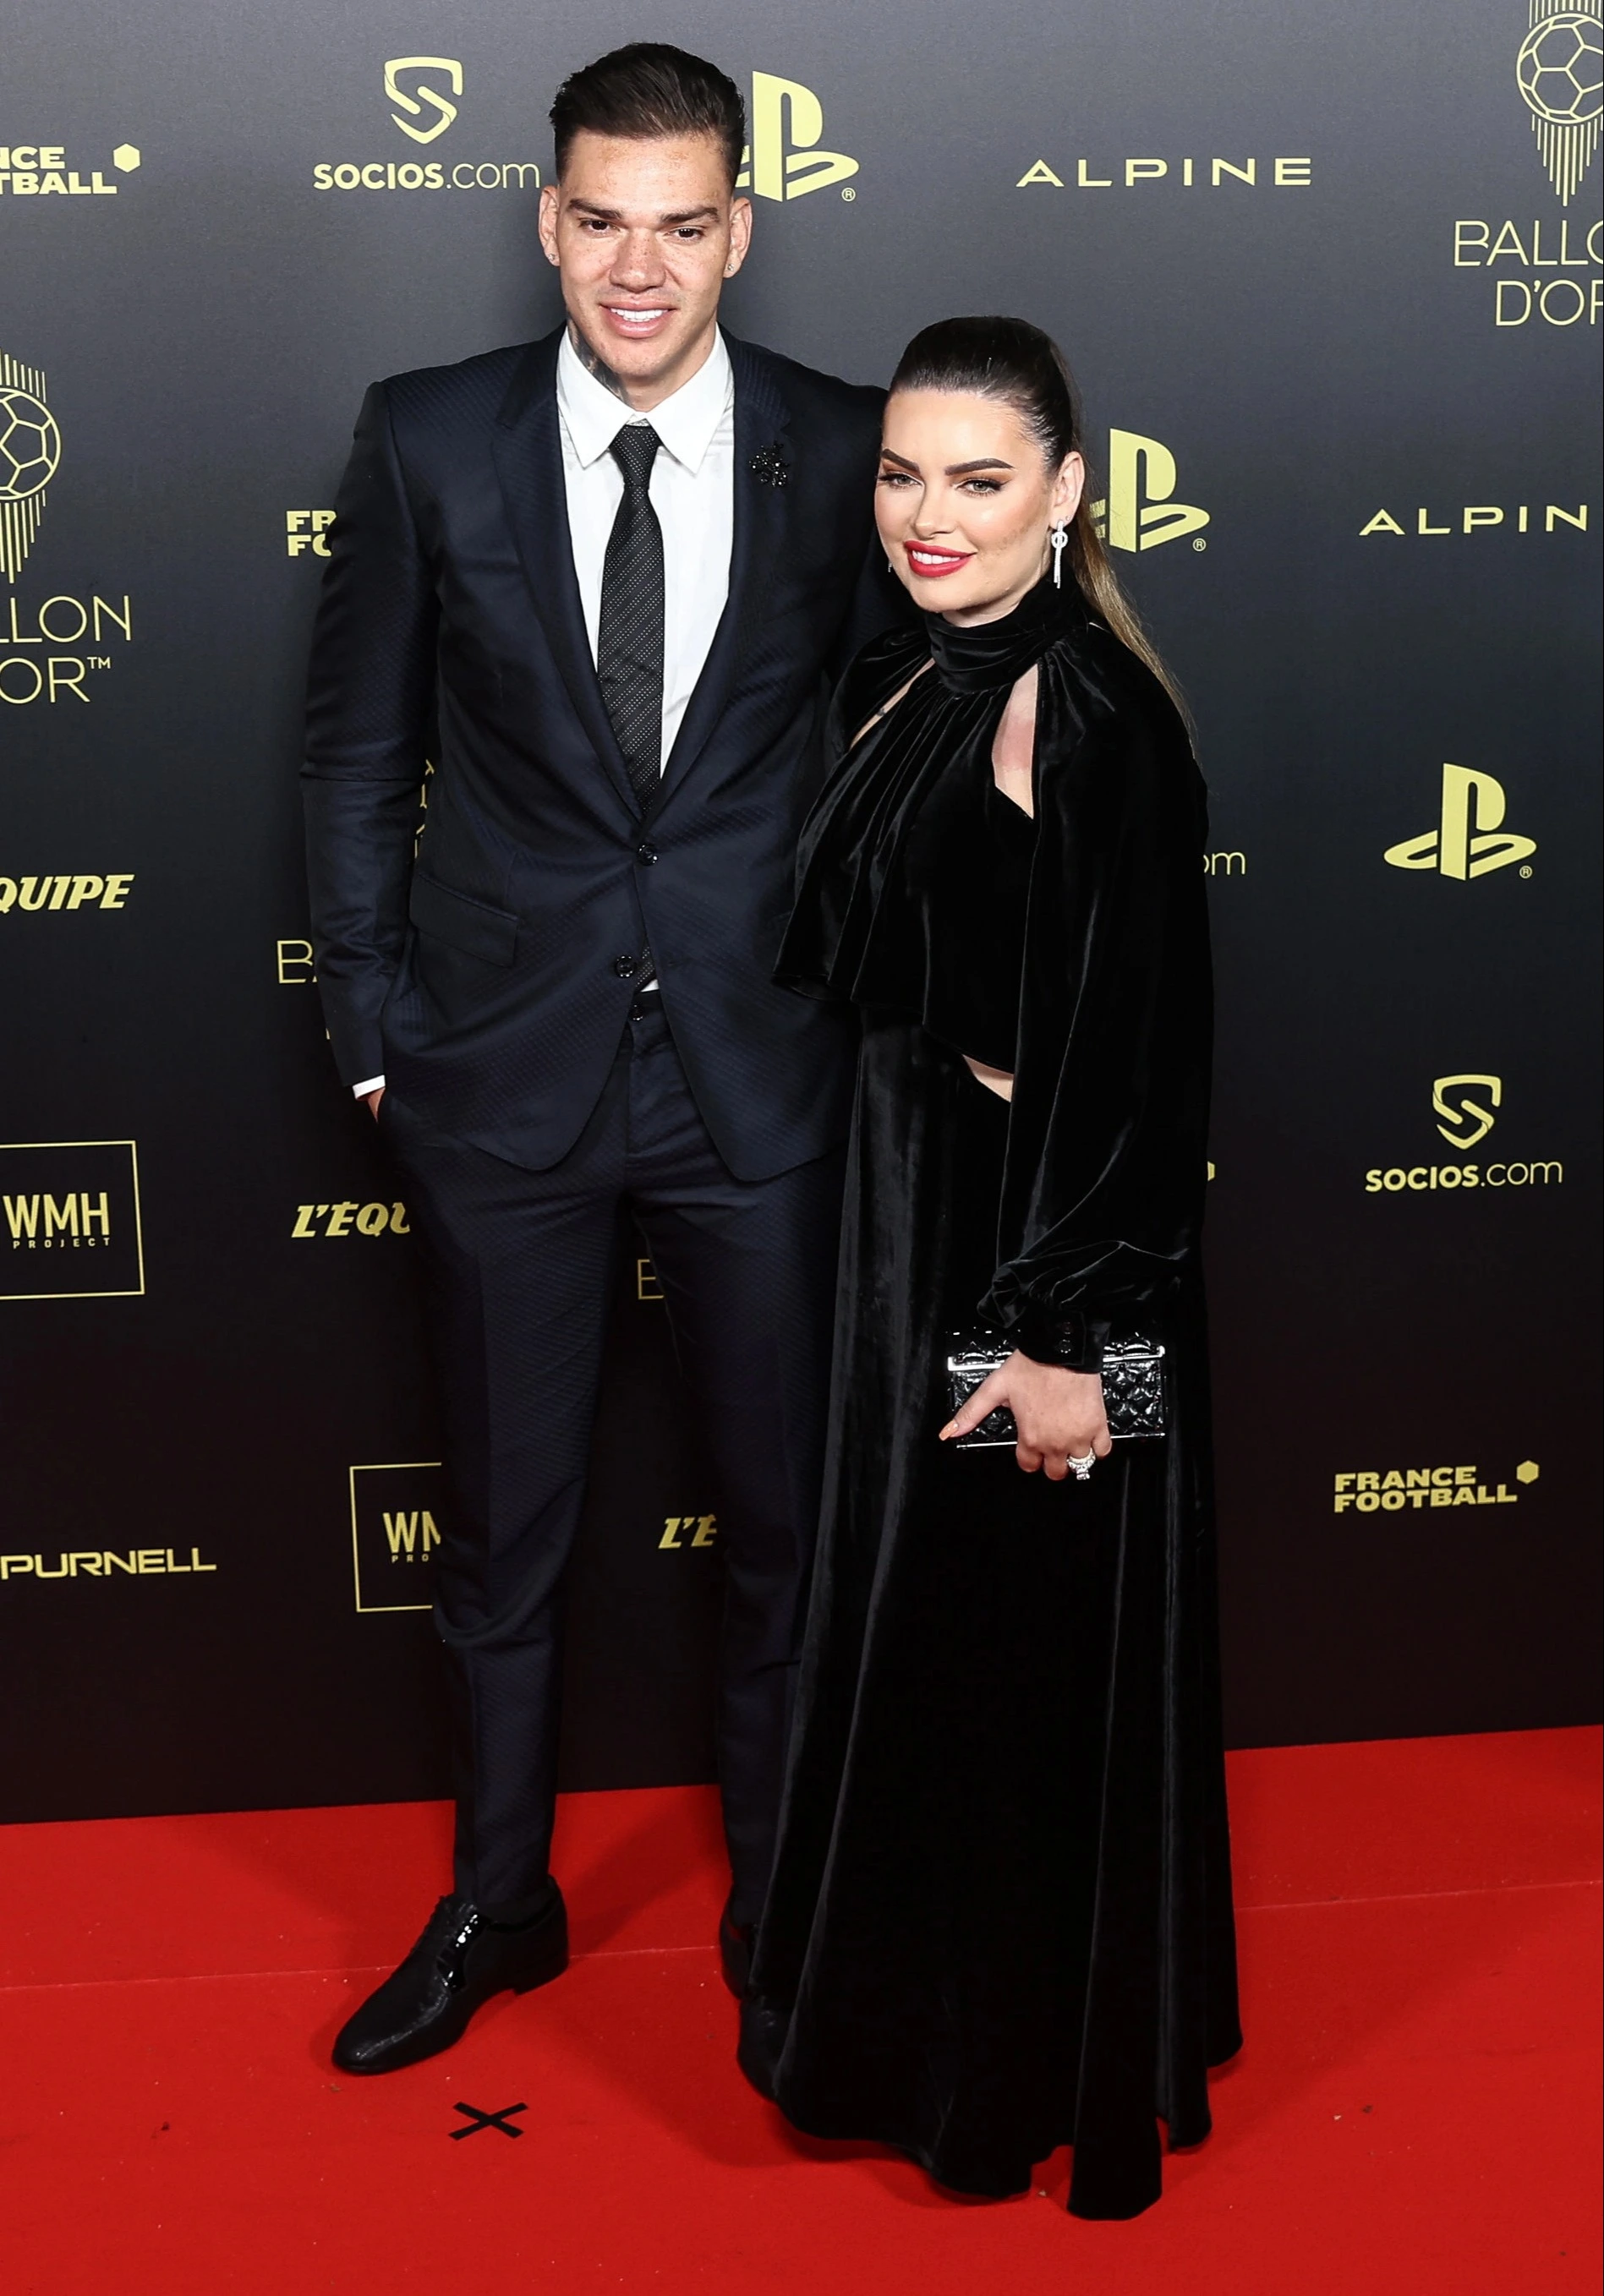 Man City keeper Ederson desperate for Champions League glory to avoid hairdryer treatment from wife